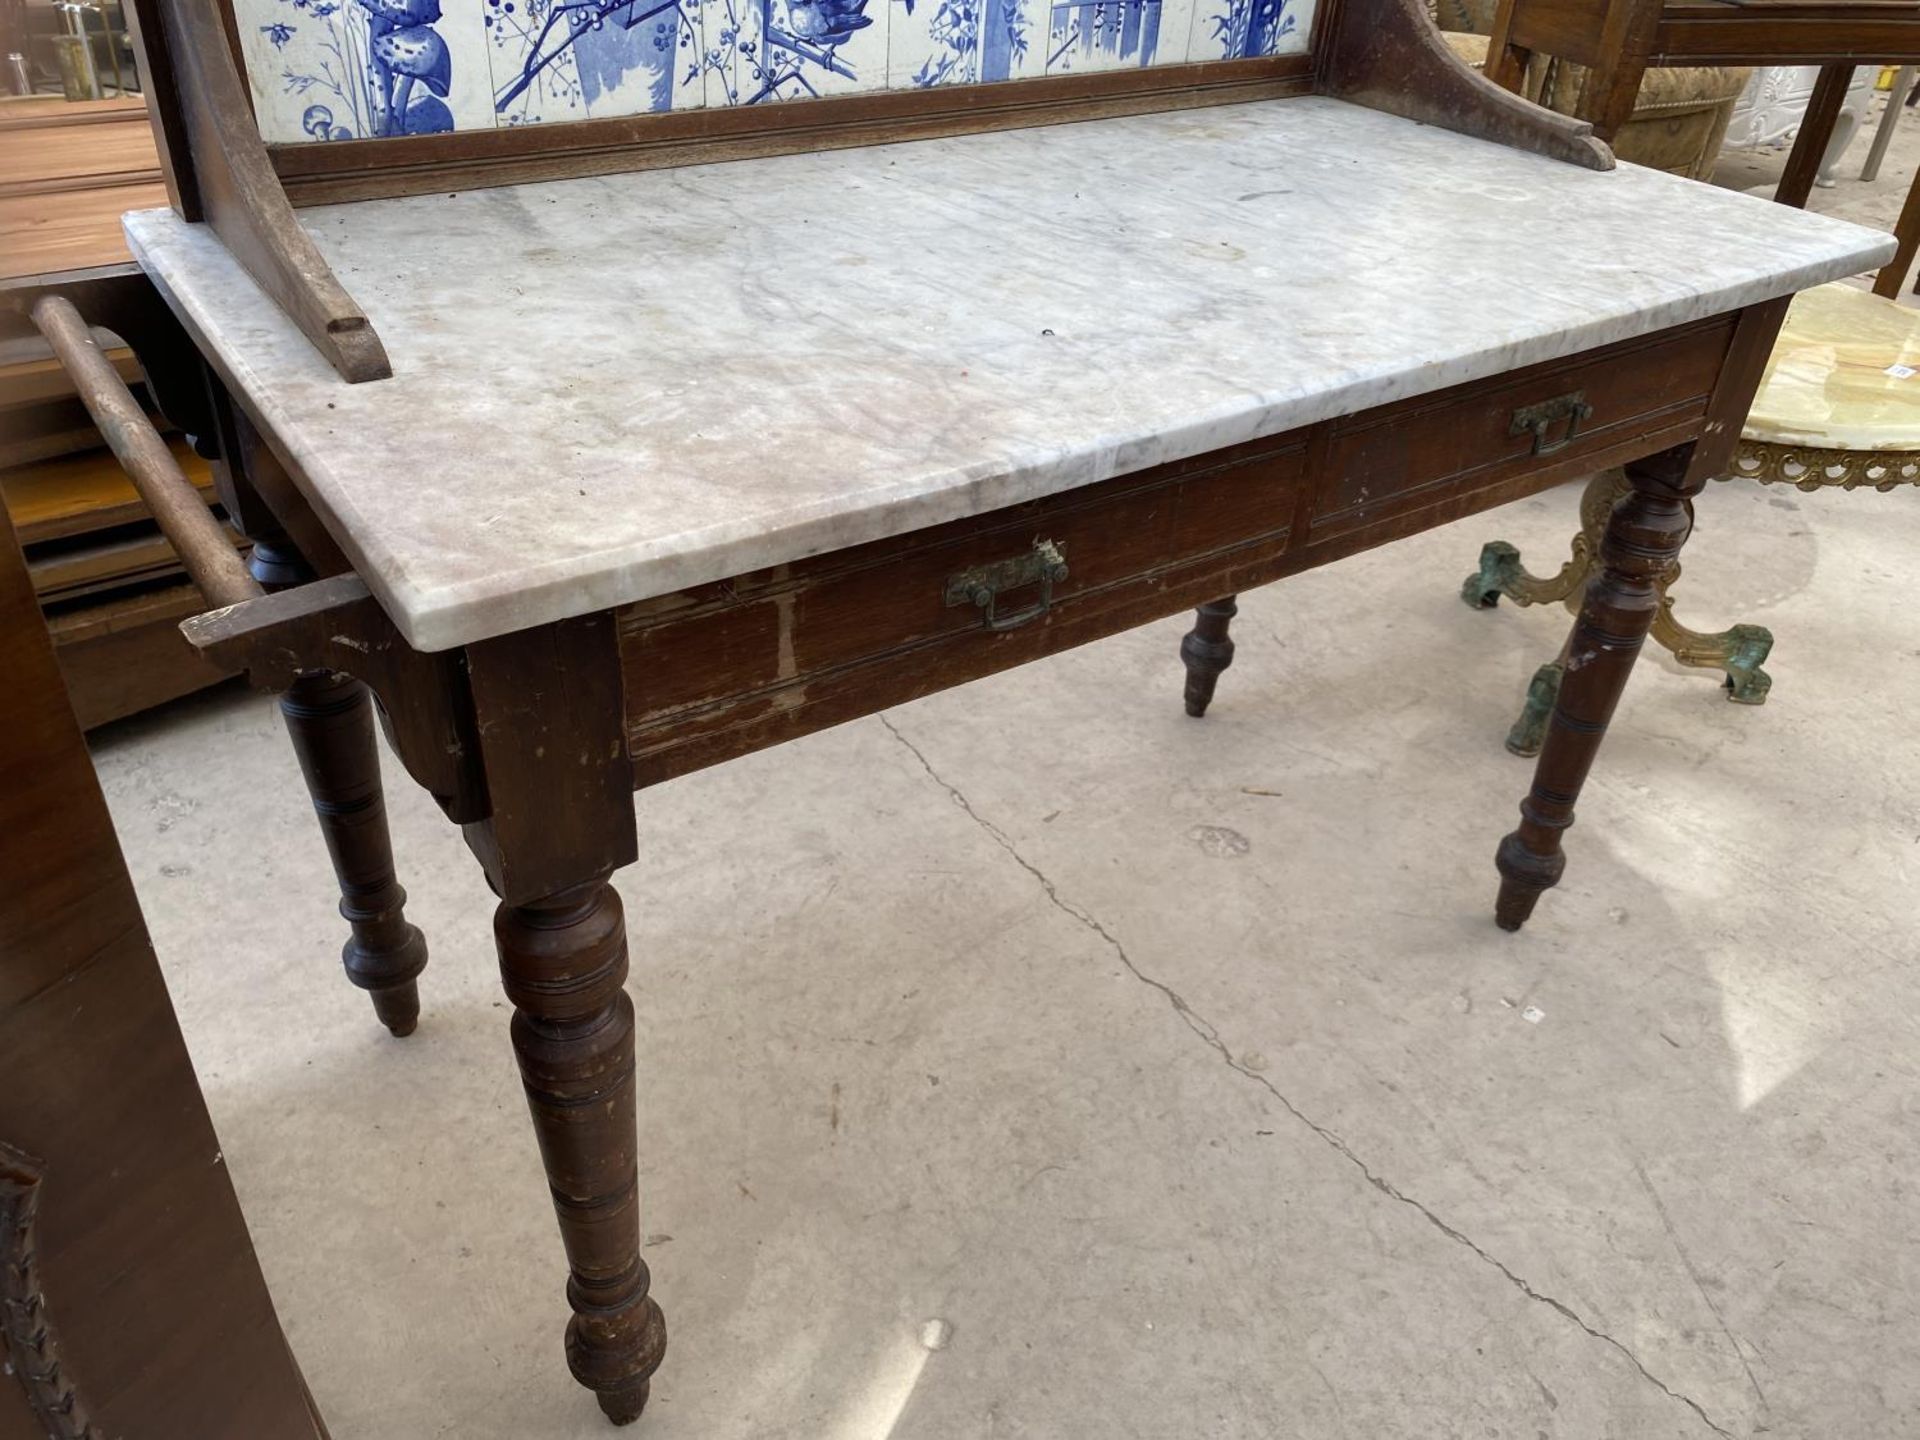 A VICTORIAN MARBLE TOPPED WASH STAND WITH TILED BACK 47" WIDE - Image 4 of 5